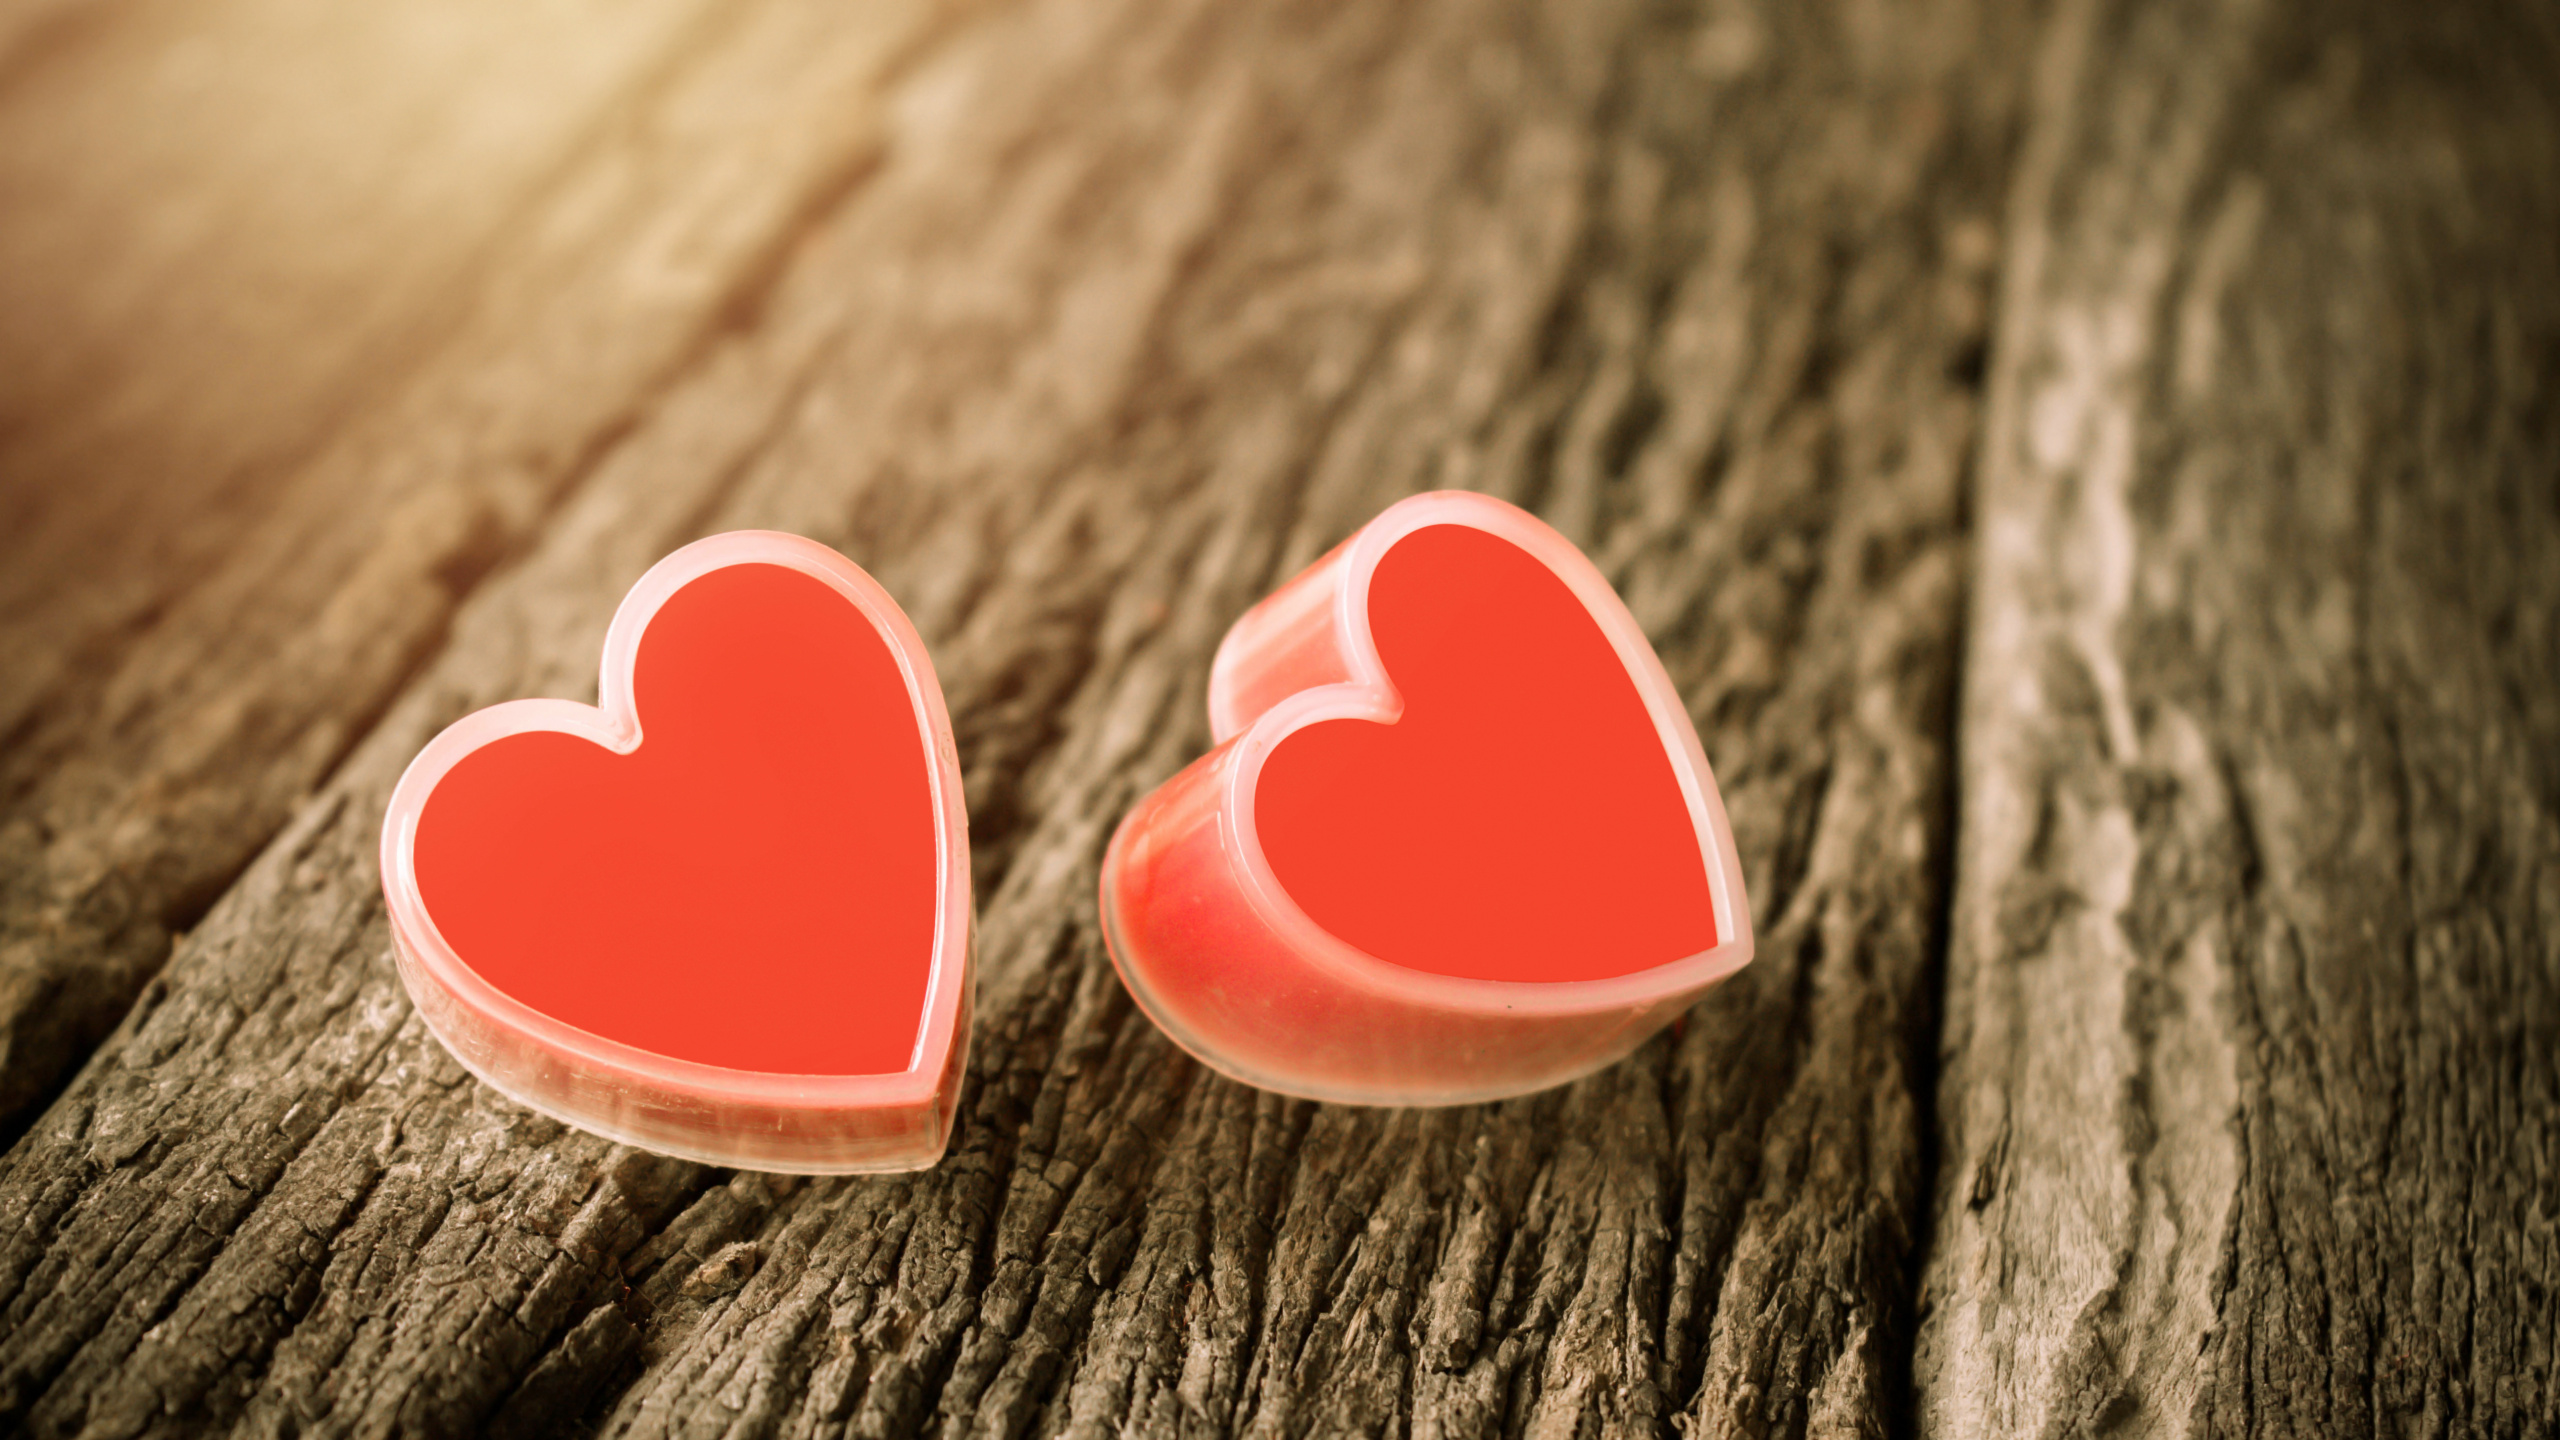 2 Red Heart on Gray Wooden Surface. Wallpaper in 2560x1440 Resolution